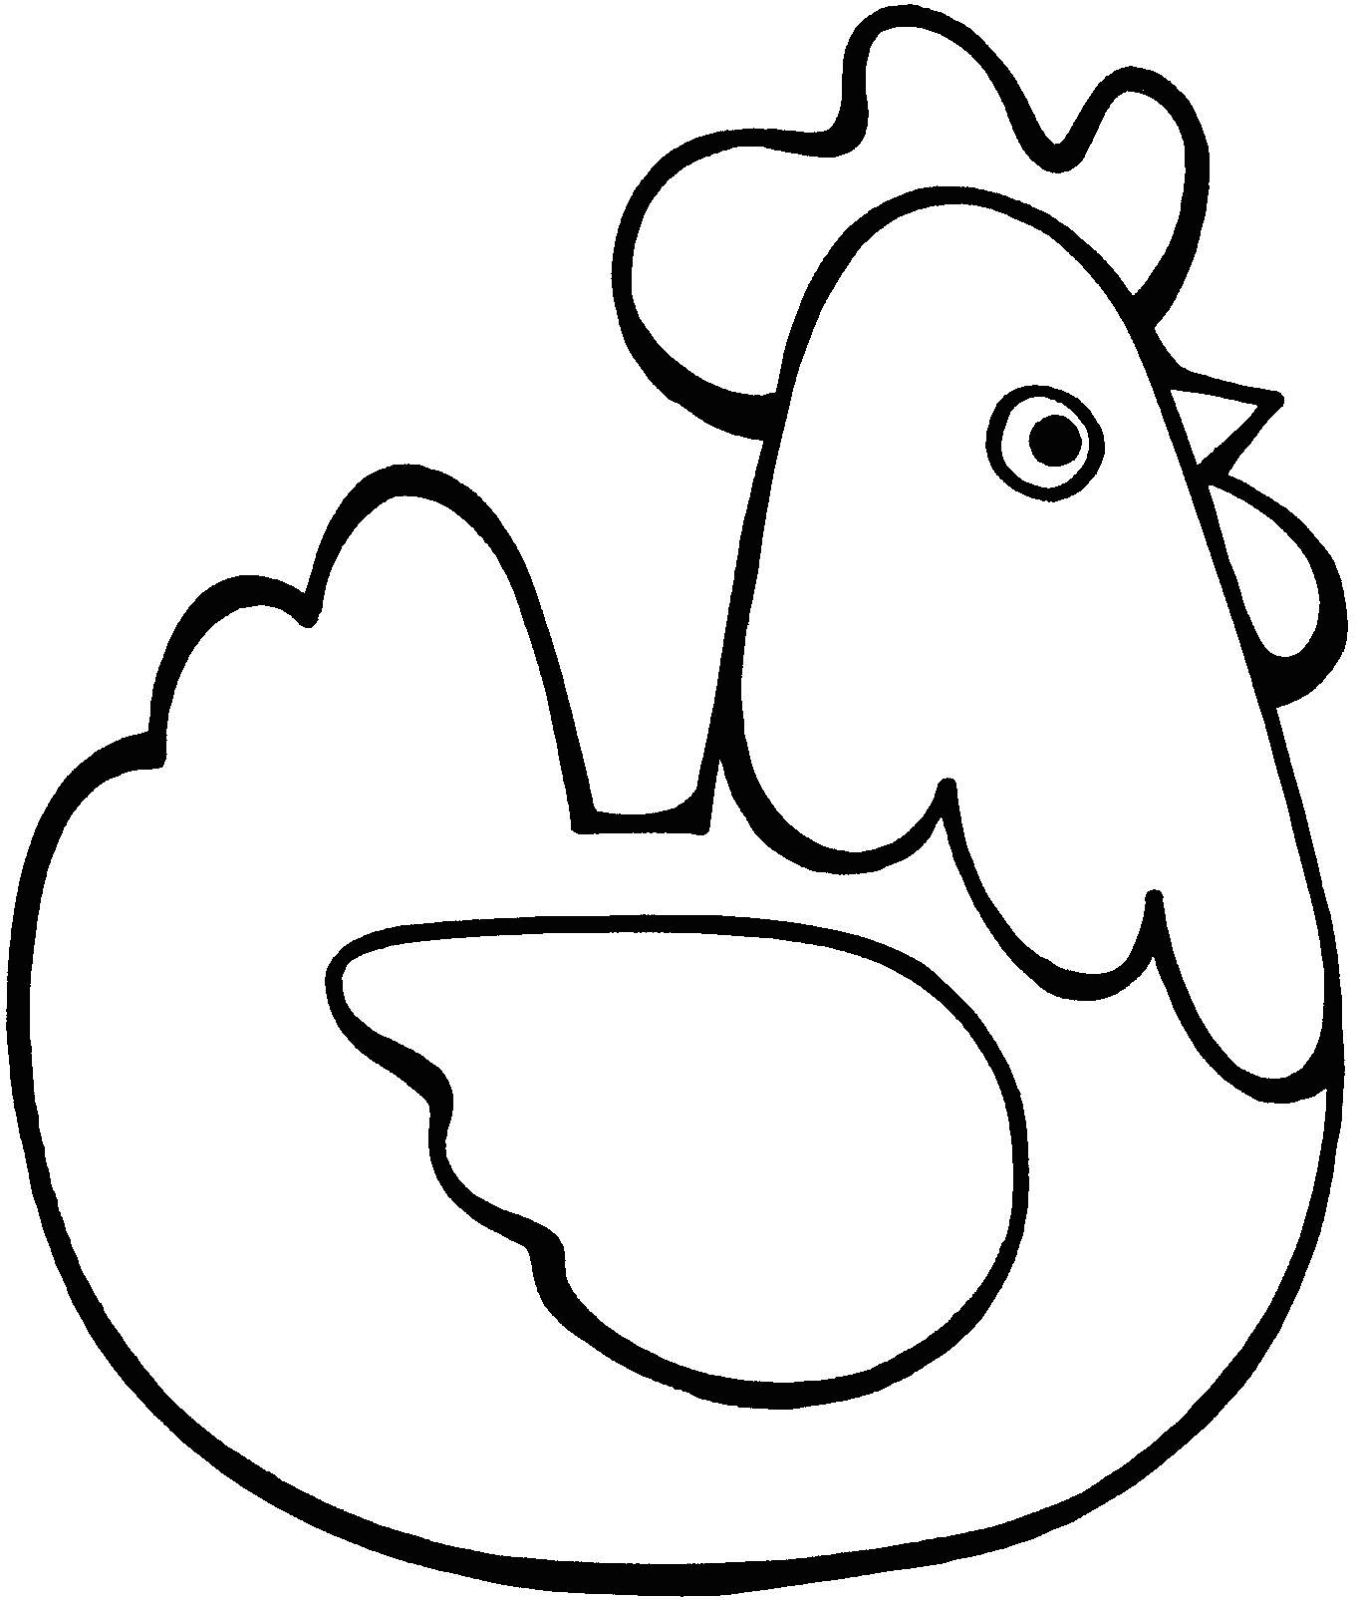 Chicken Co Op Coloring Page Coloring Pages